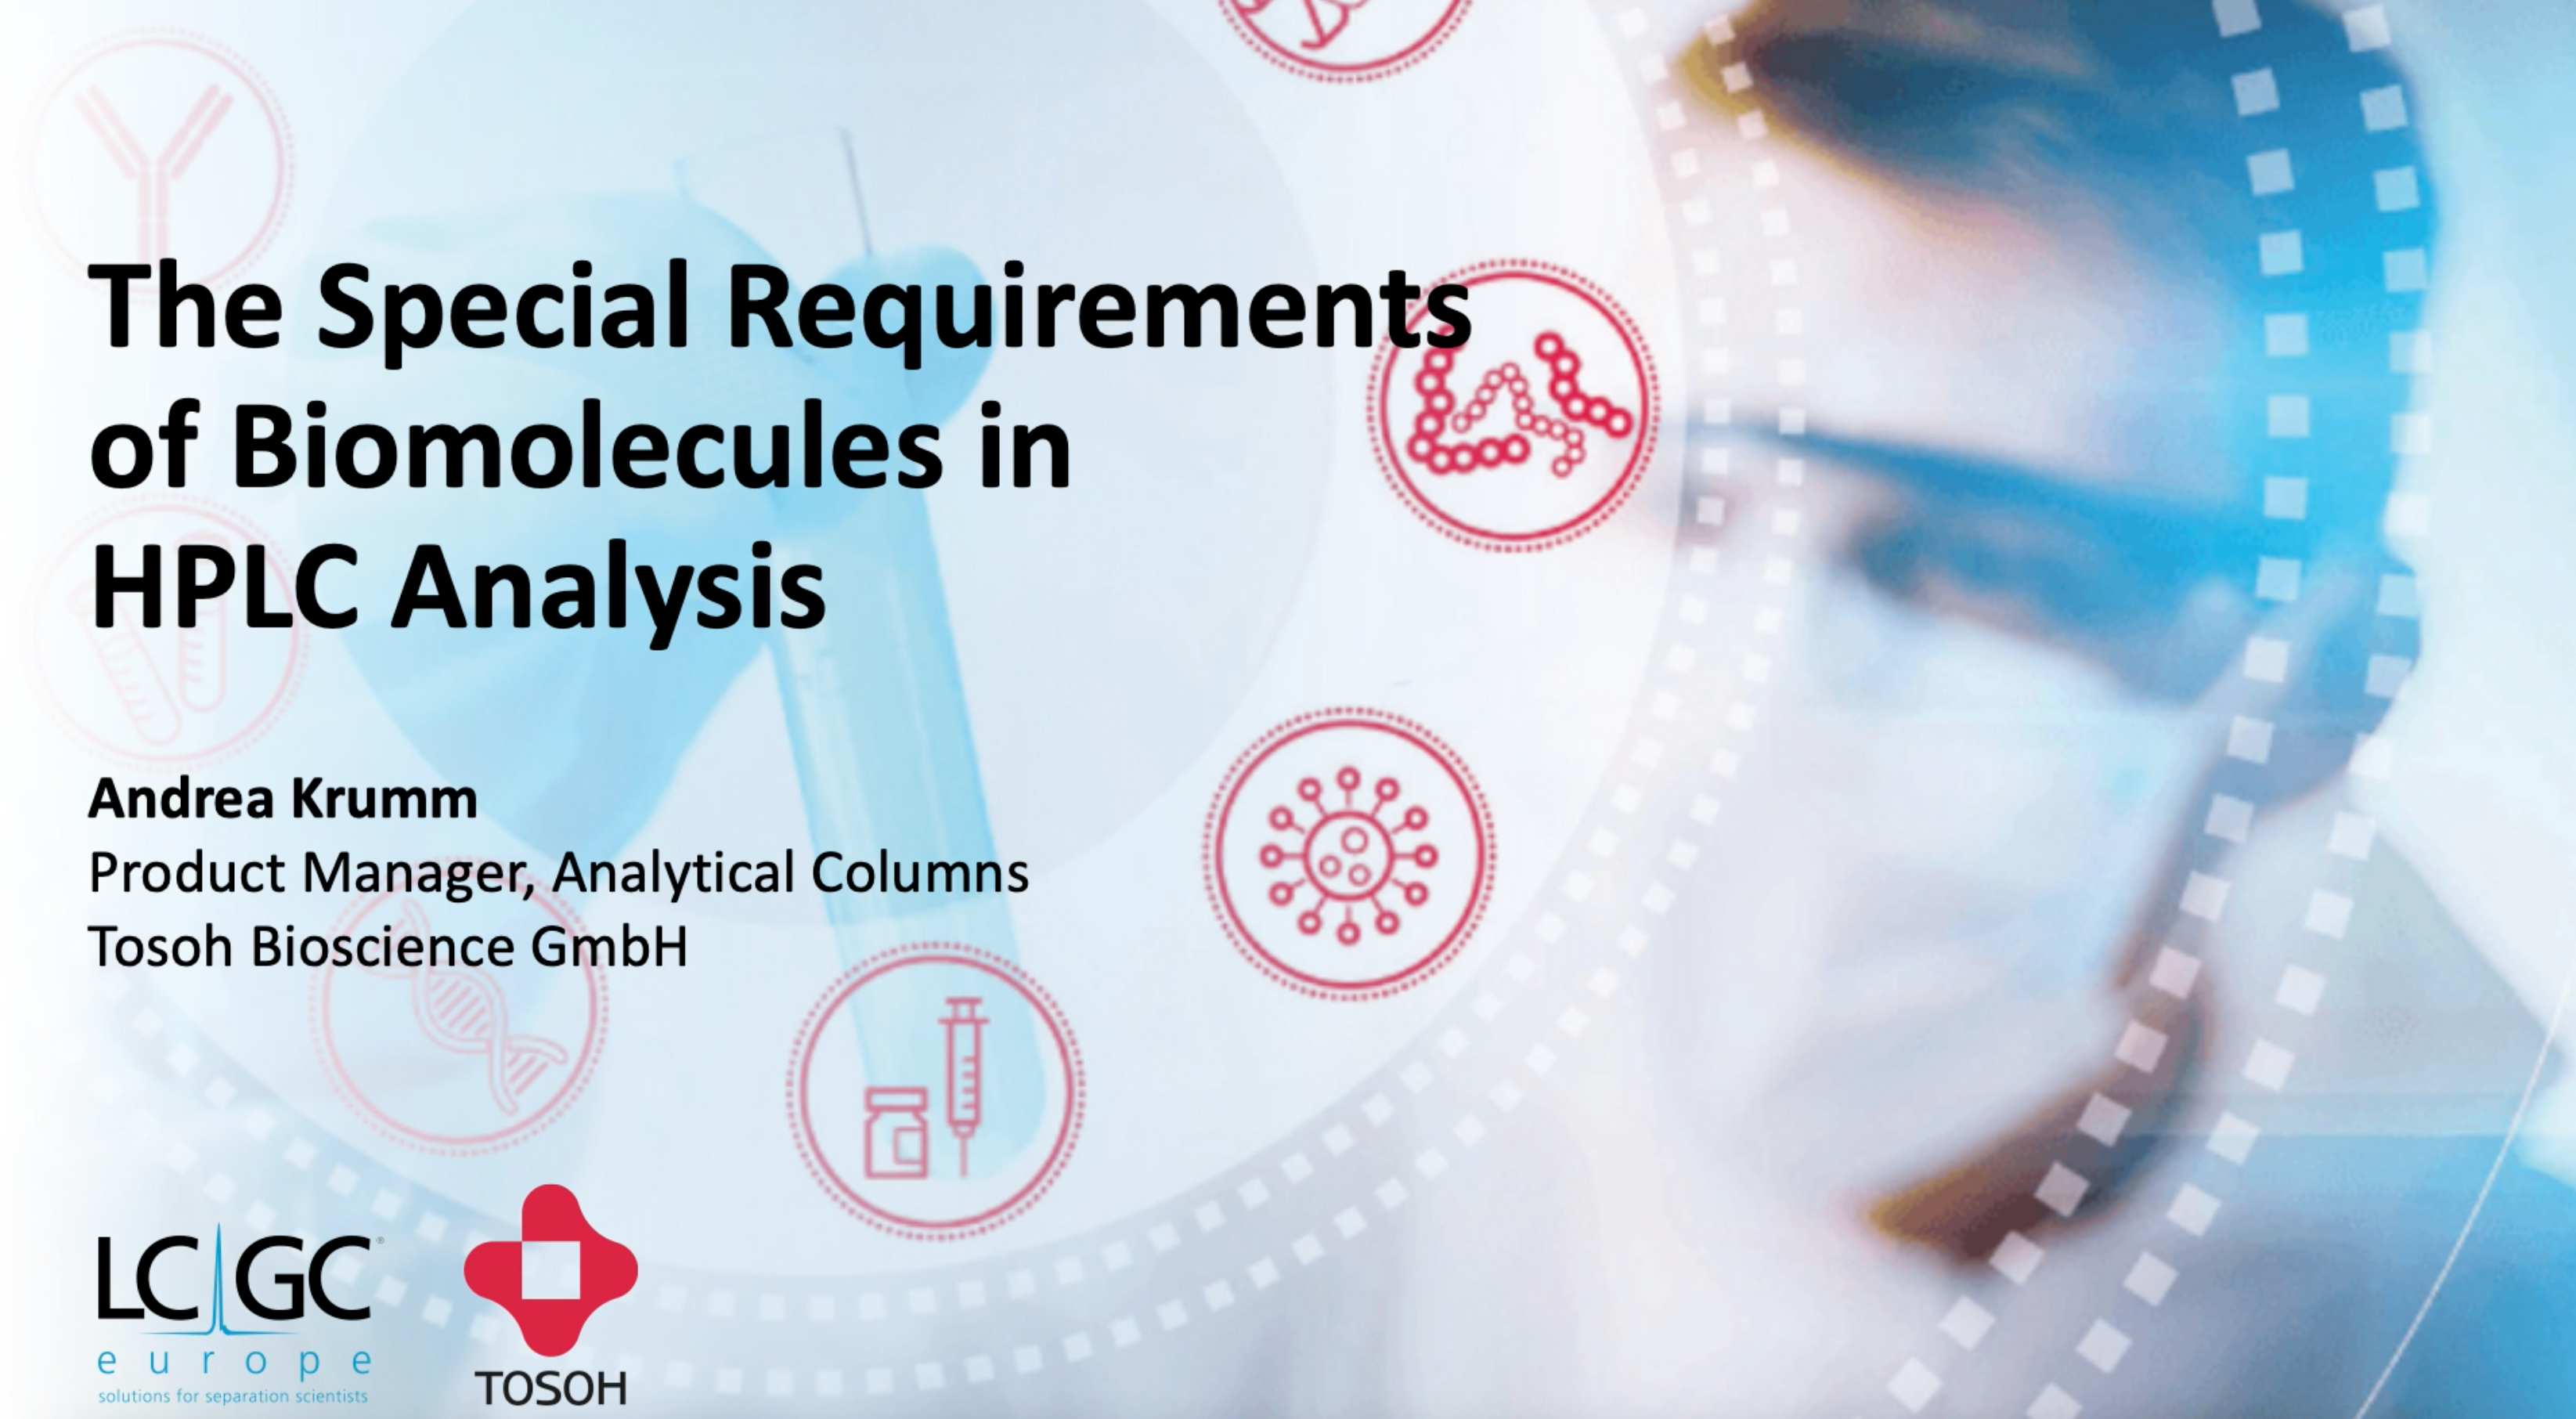 The Special Requirements of Biomolecules in HPLC Analysis with Andrea Krumm